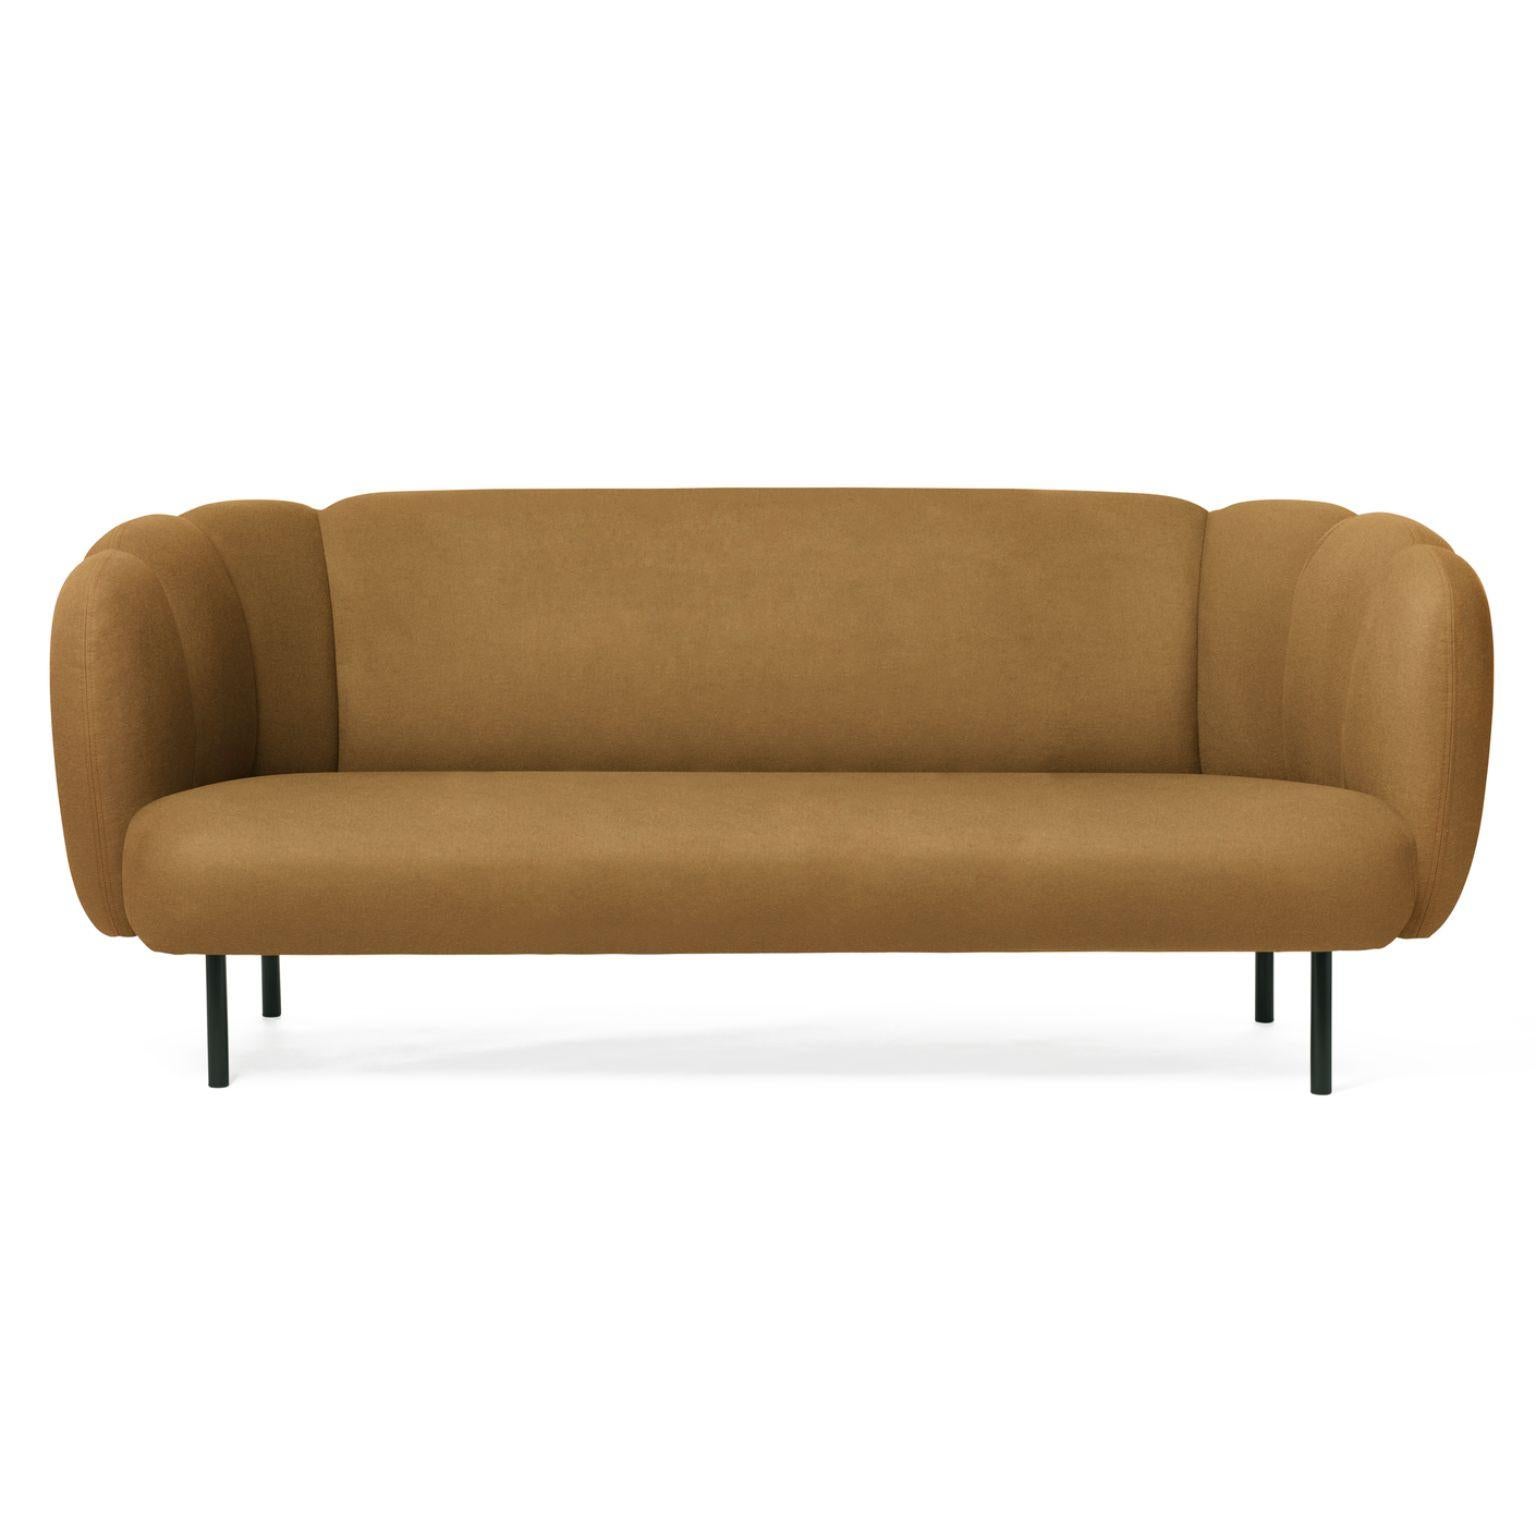 Caper 3 seater with stitches olive by Warm Nordic
Dimensions: D 200 x W 84 x H 80 cm
Material: Textile upholstery, Wooden frame, Powder coated black steel legs.
Weight: 55.5 kg
Also available in different colours and finishes.

An elegant sofa